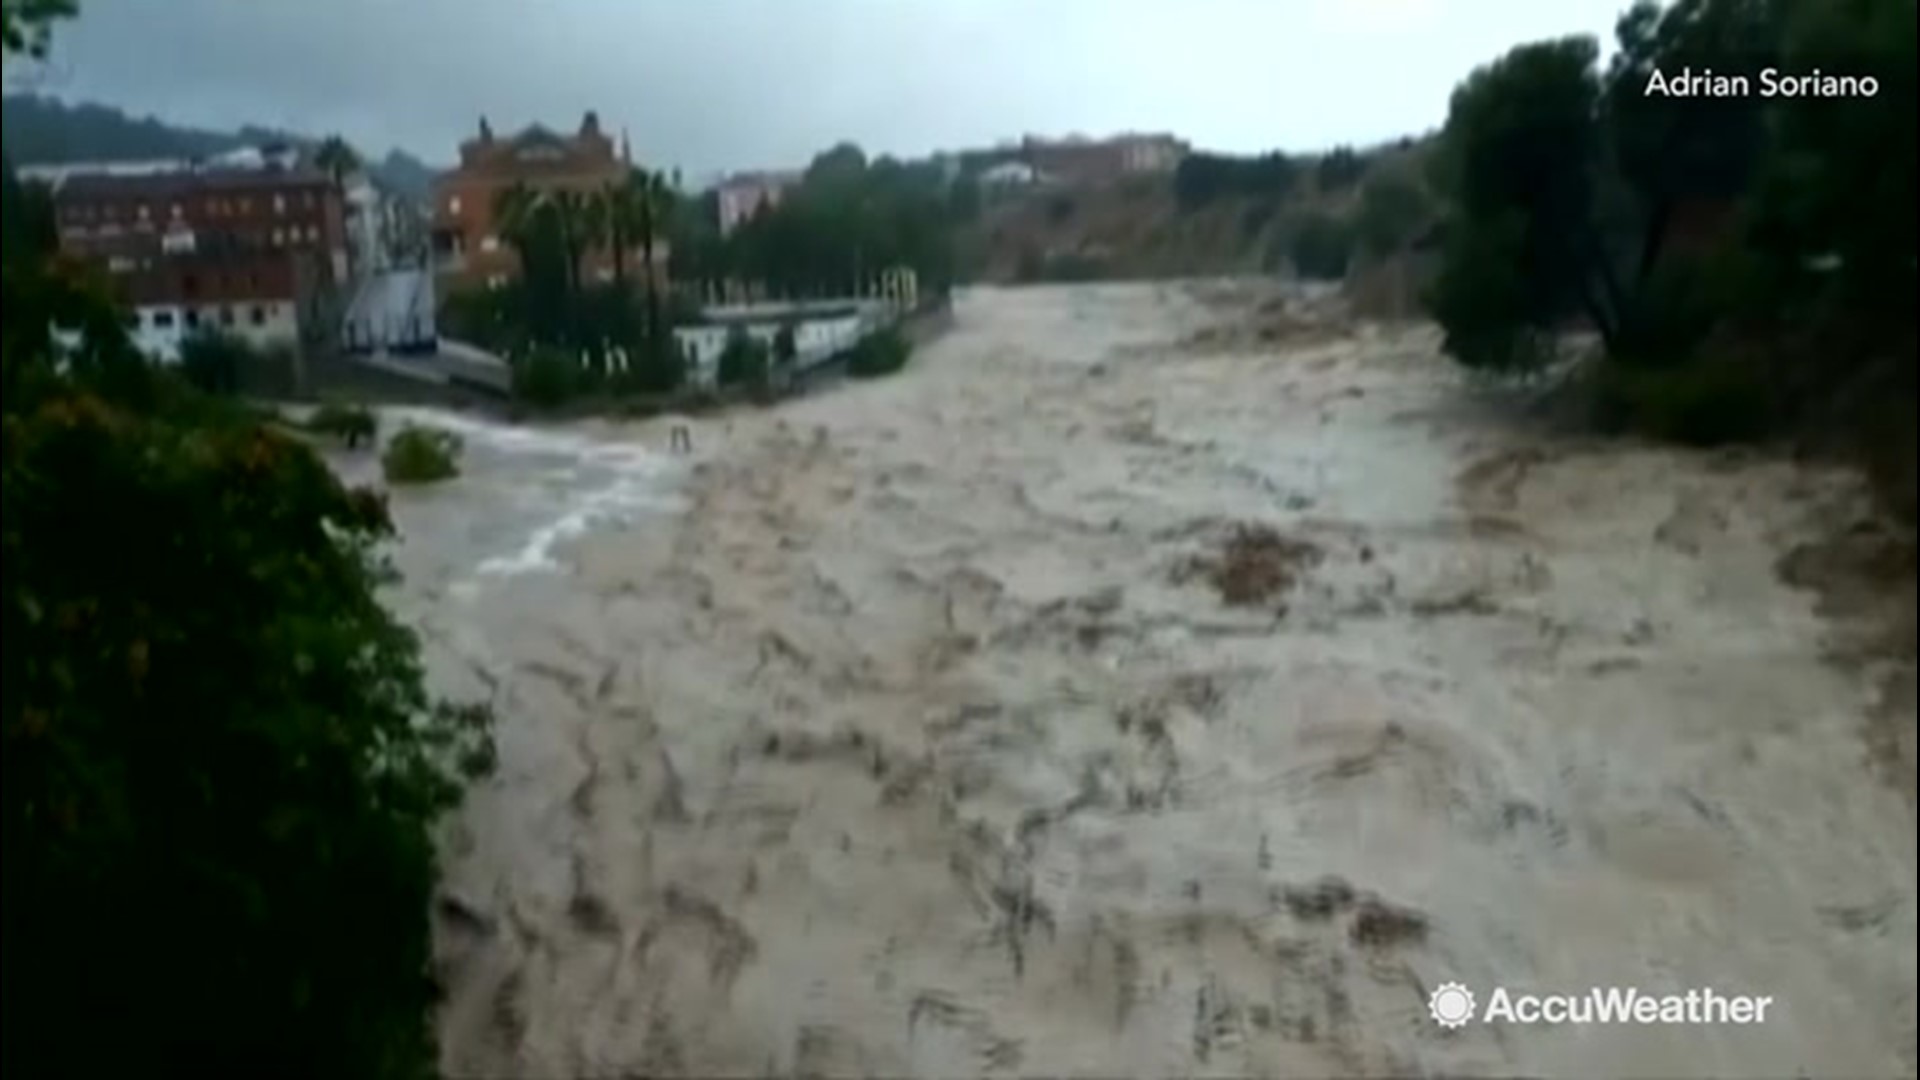 Severe rainfall caused floodwaters to gush through Mogente, Spain, on Sept. 12. You can see the water race downstream with incredible speed. No deaths or injuries were reported from this area.